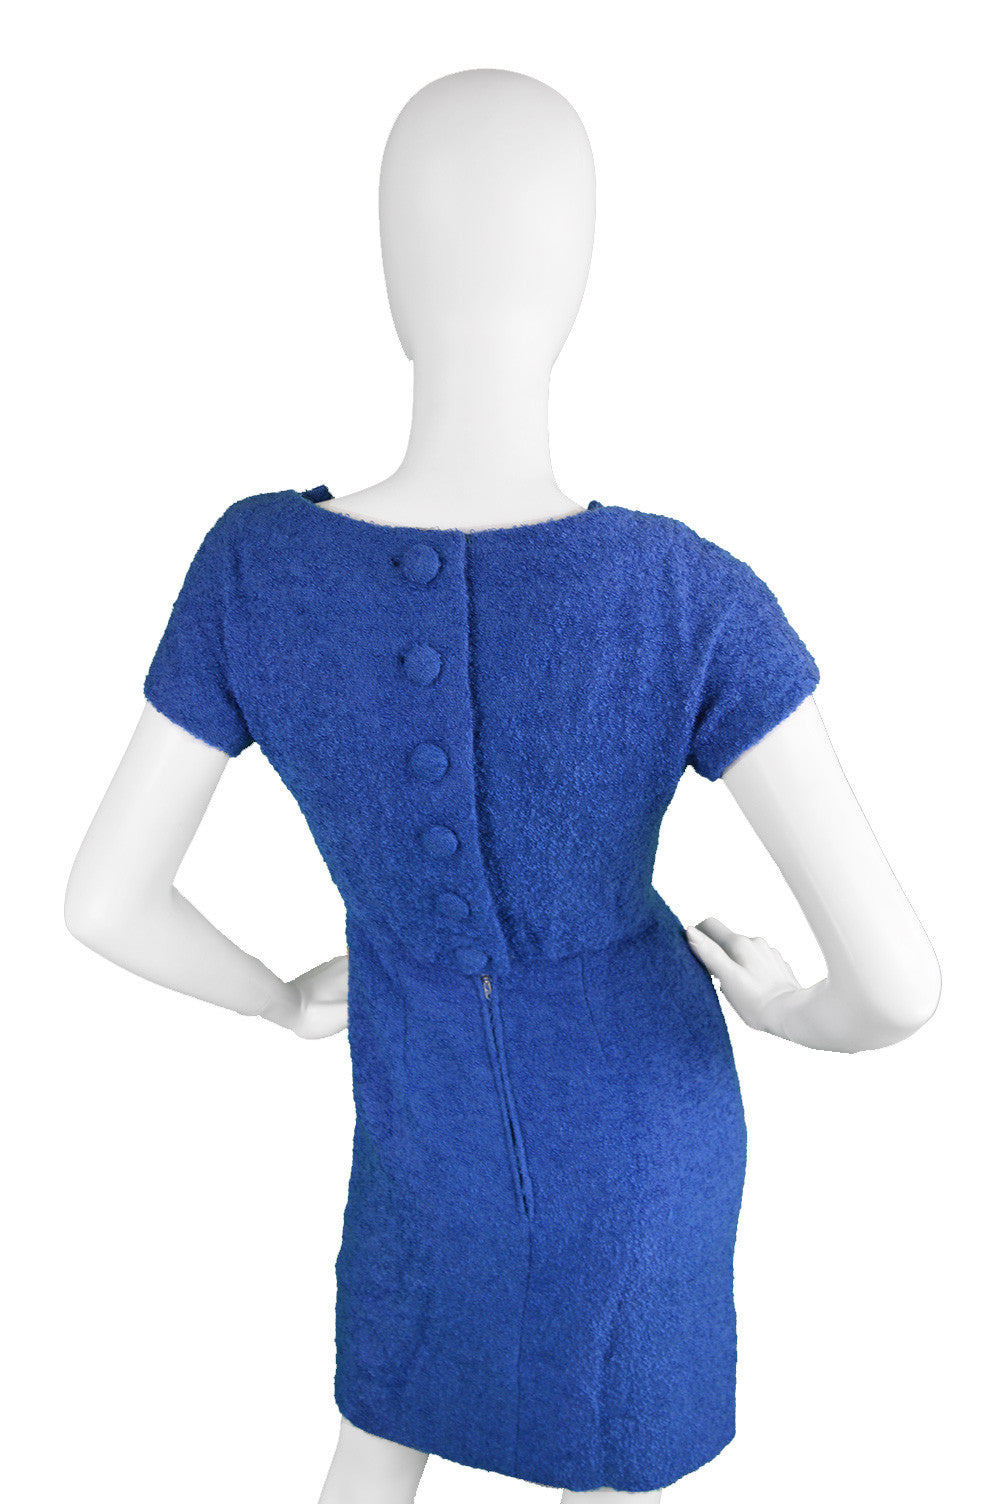 Short wool dress by Jacques Heim for I.Magnin